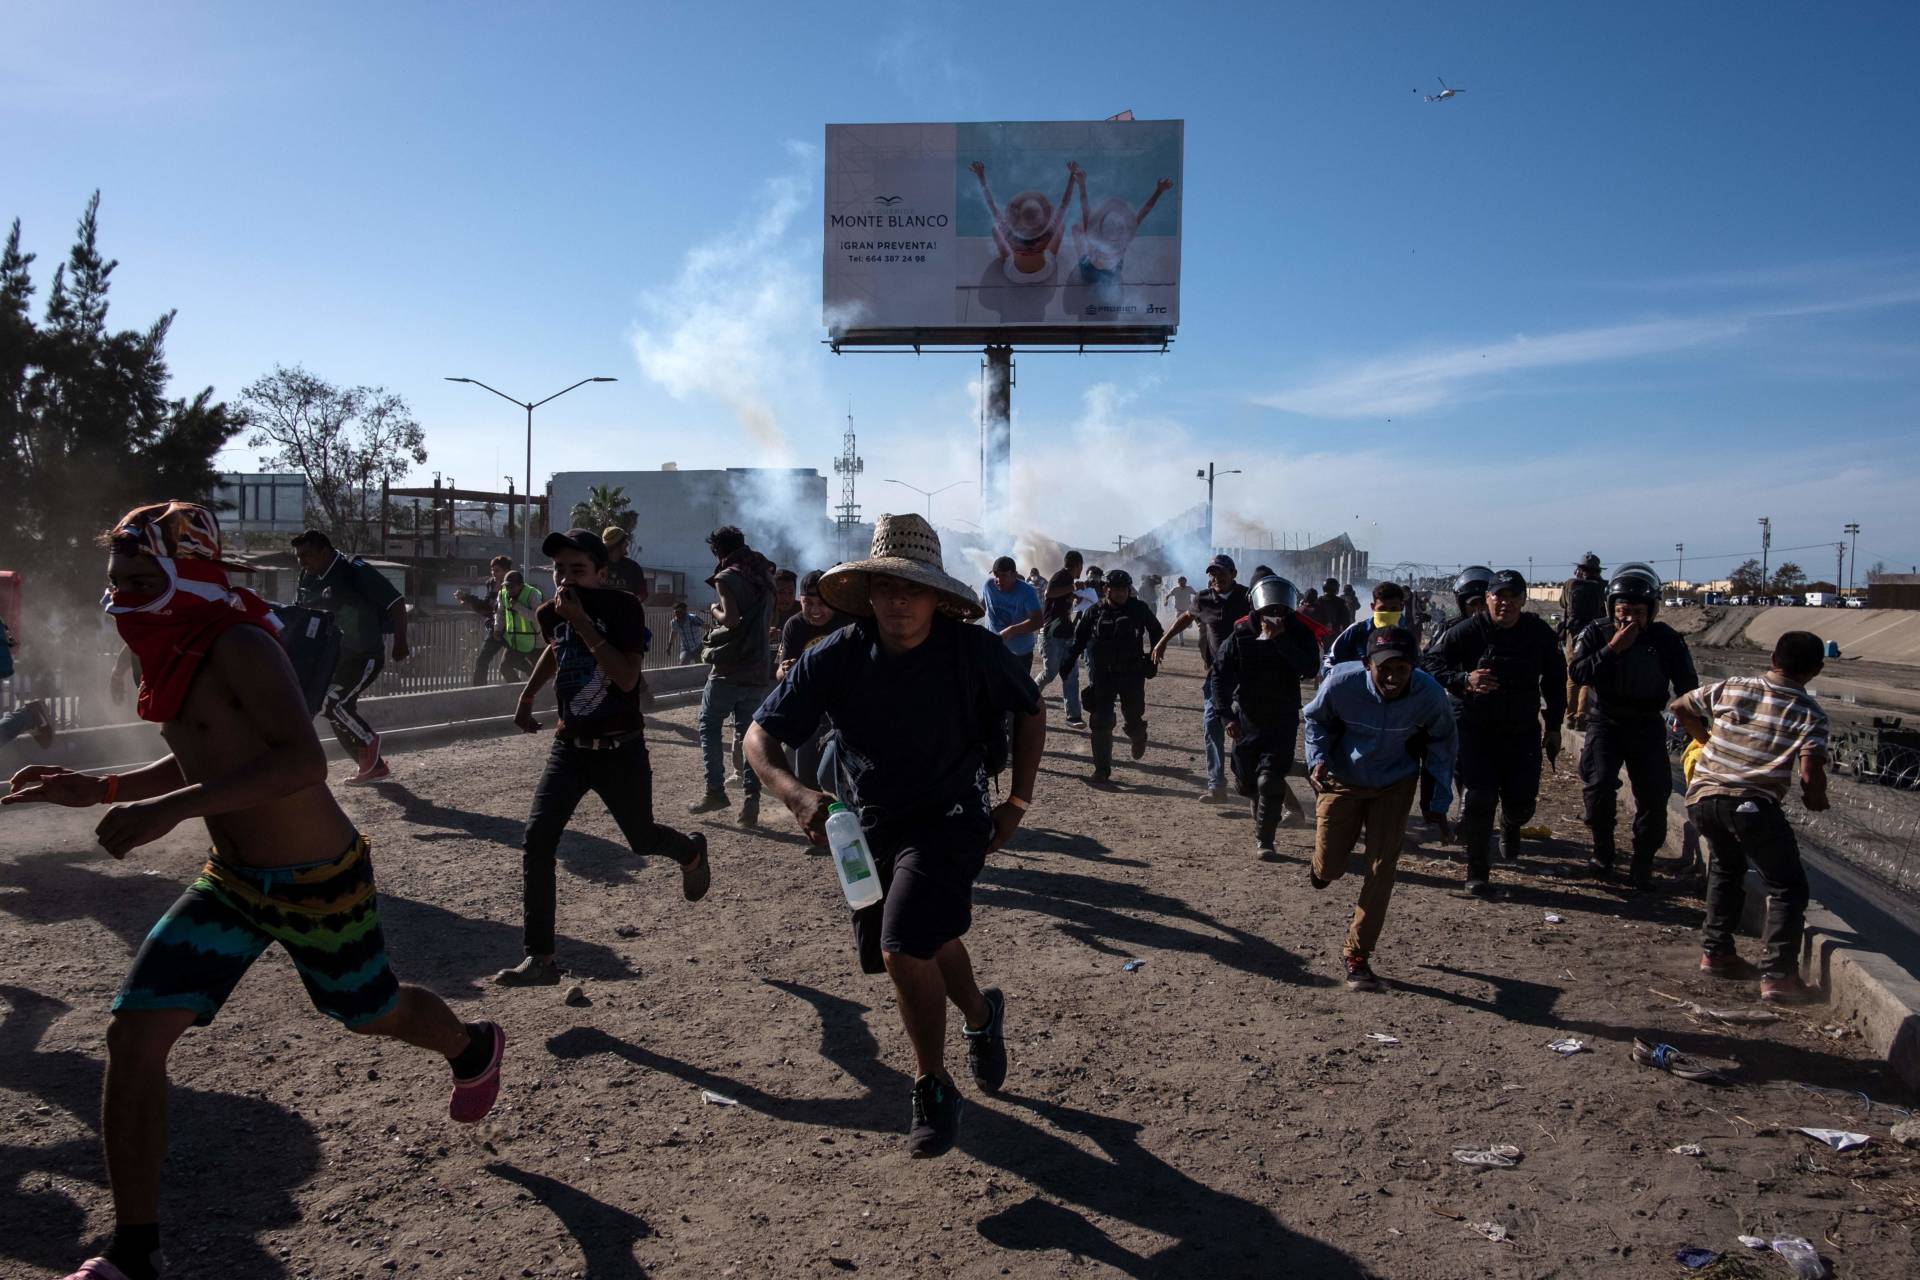 Central American migrants, mostly Hondurans, run along the Tijuana River near the El Chaparral border crossing after U.S. border agents threw tear gas from a distance to disperse them after an alleged verbal dispute on Nov. 25, 2018. Guillermo Arias/AFP/Getty Images